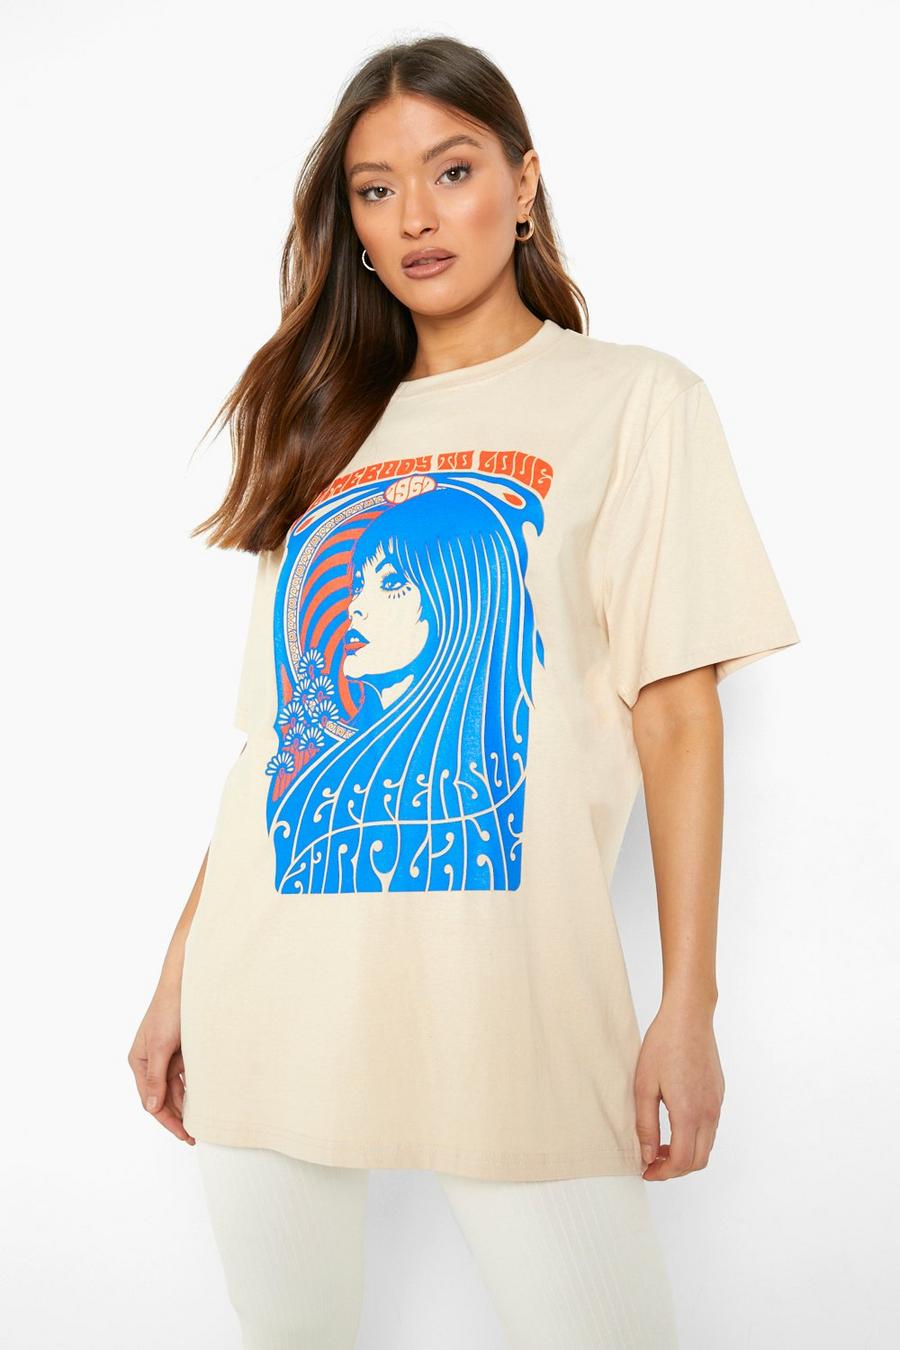 Stone beige Jefferson Airplane License Oversized T-shirt image number 1